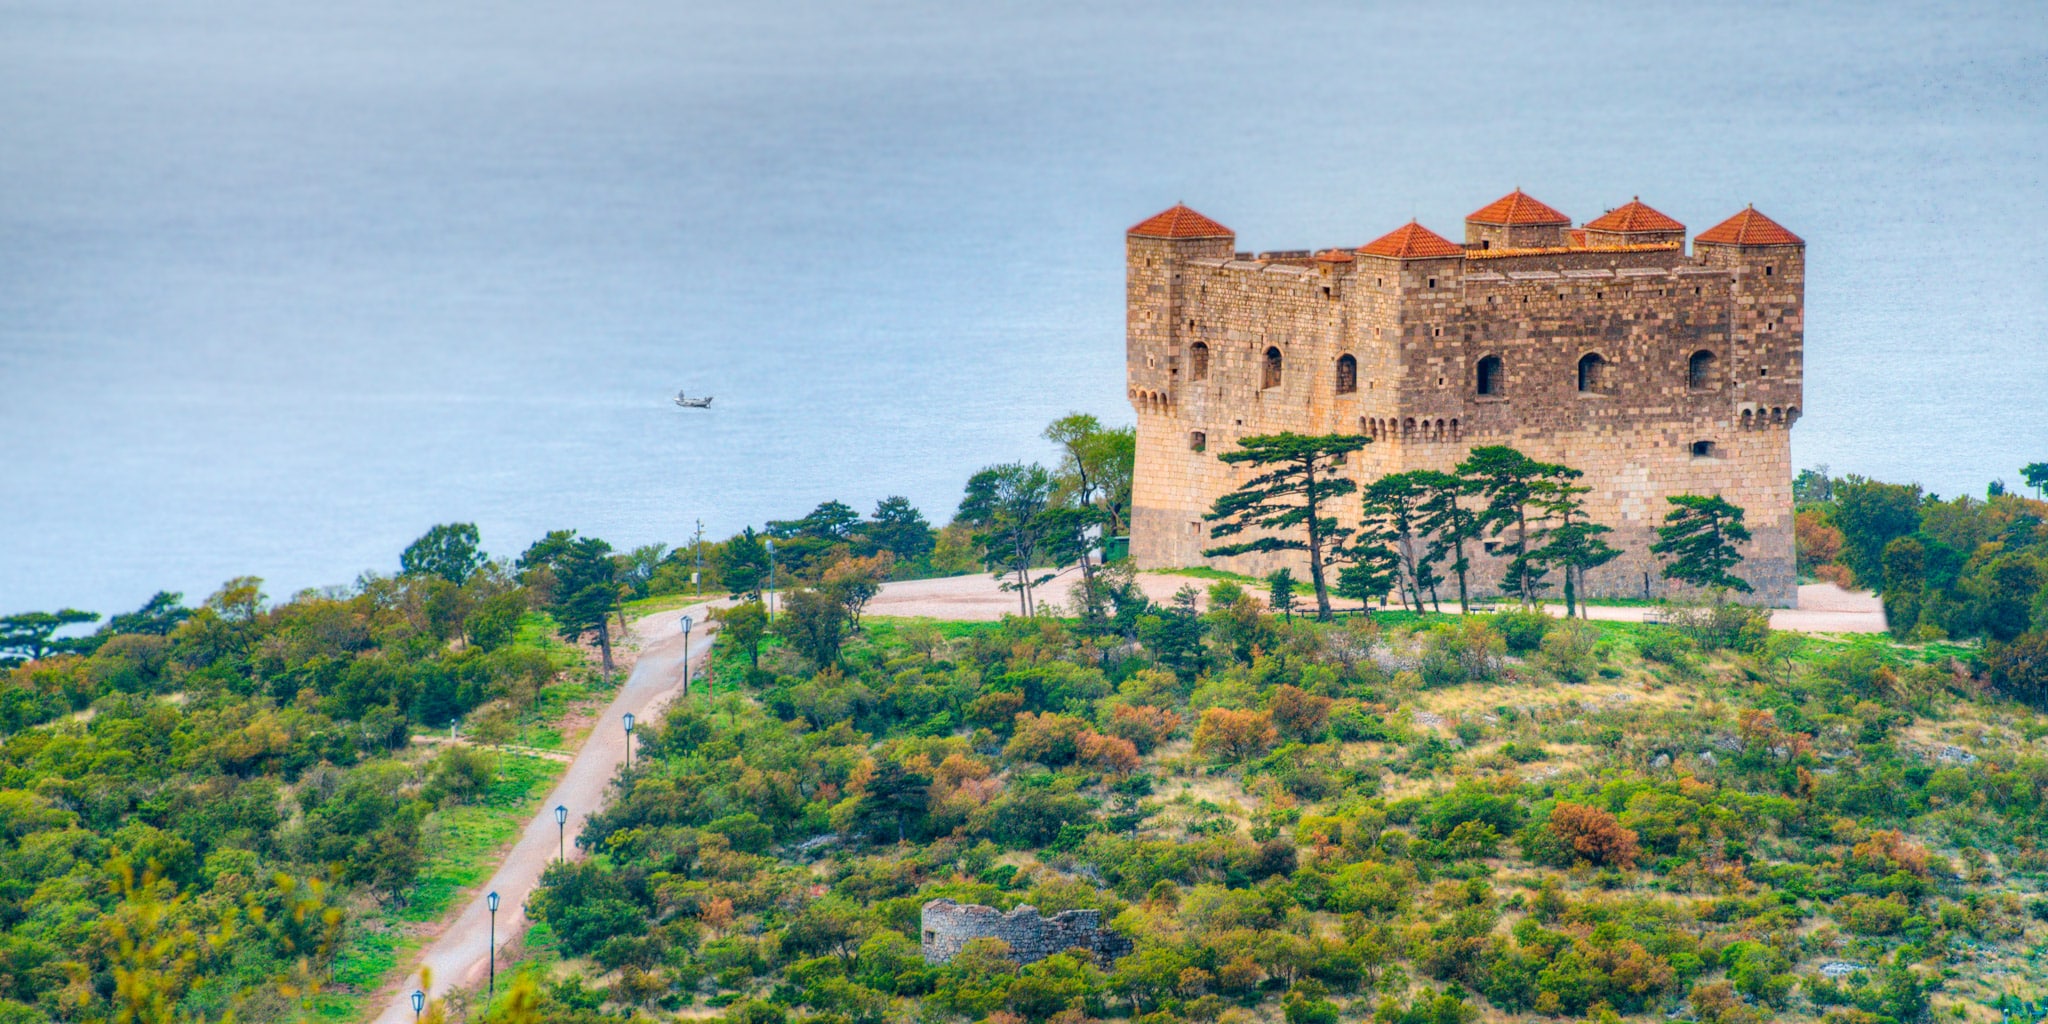 A view of the Nihaj Fortress, built in the 16th Century on the hill if the same name, near the northern Dalmatian city of Senj in Croatia.